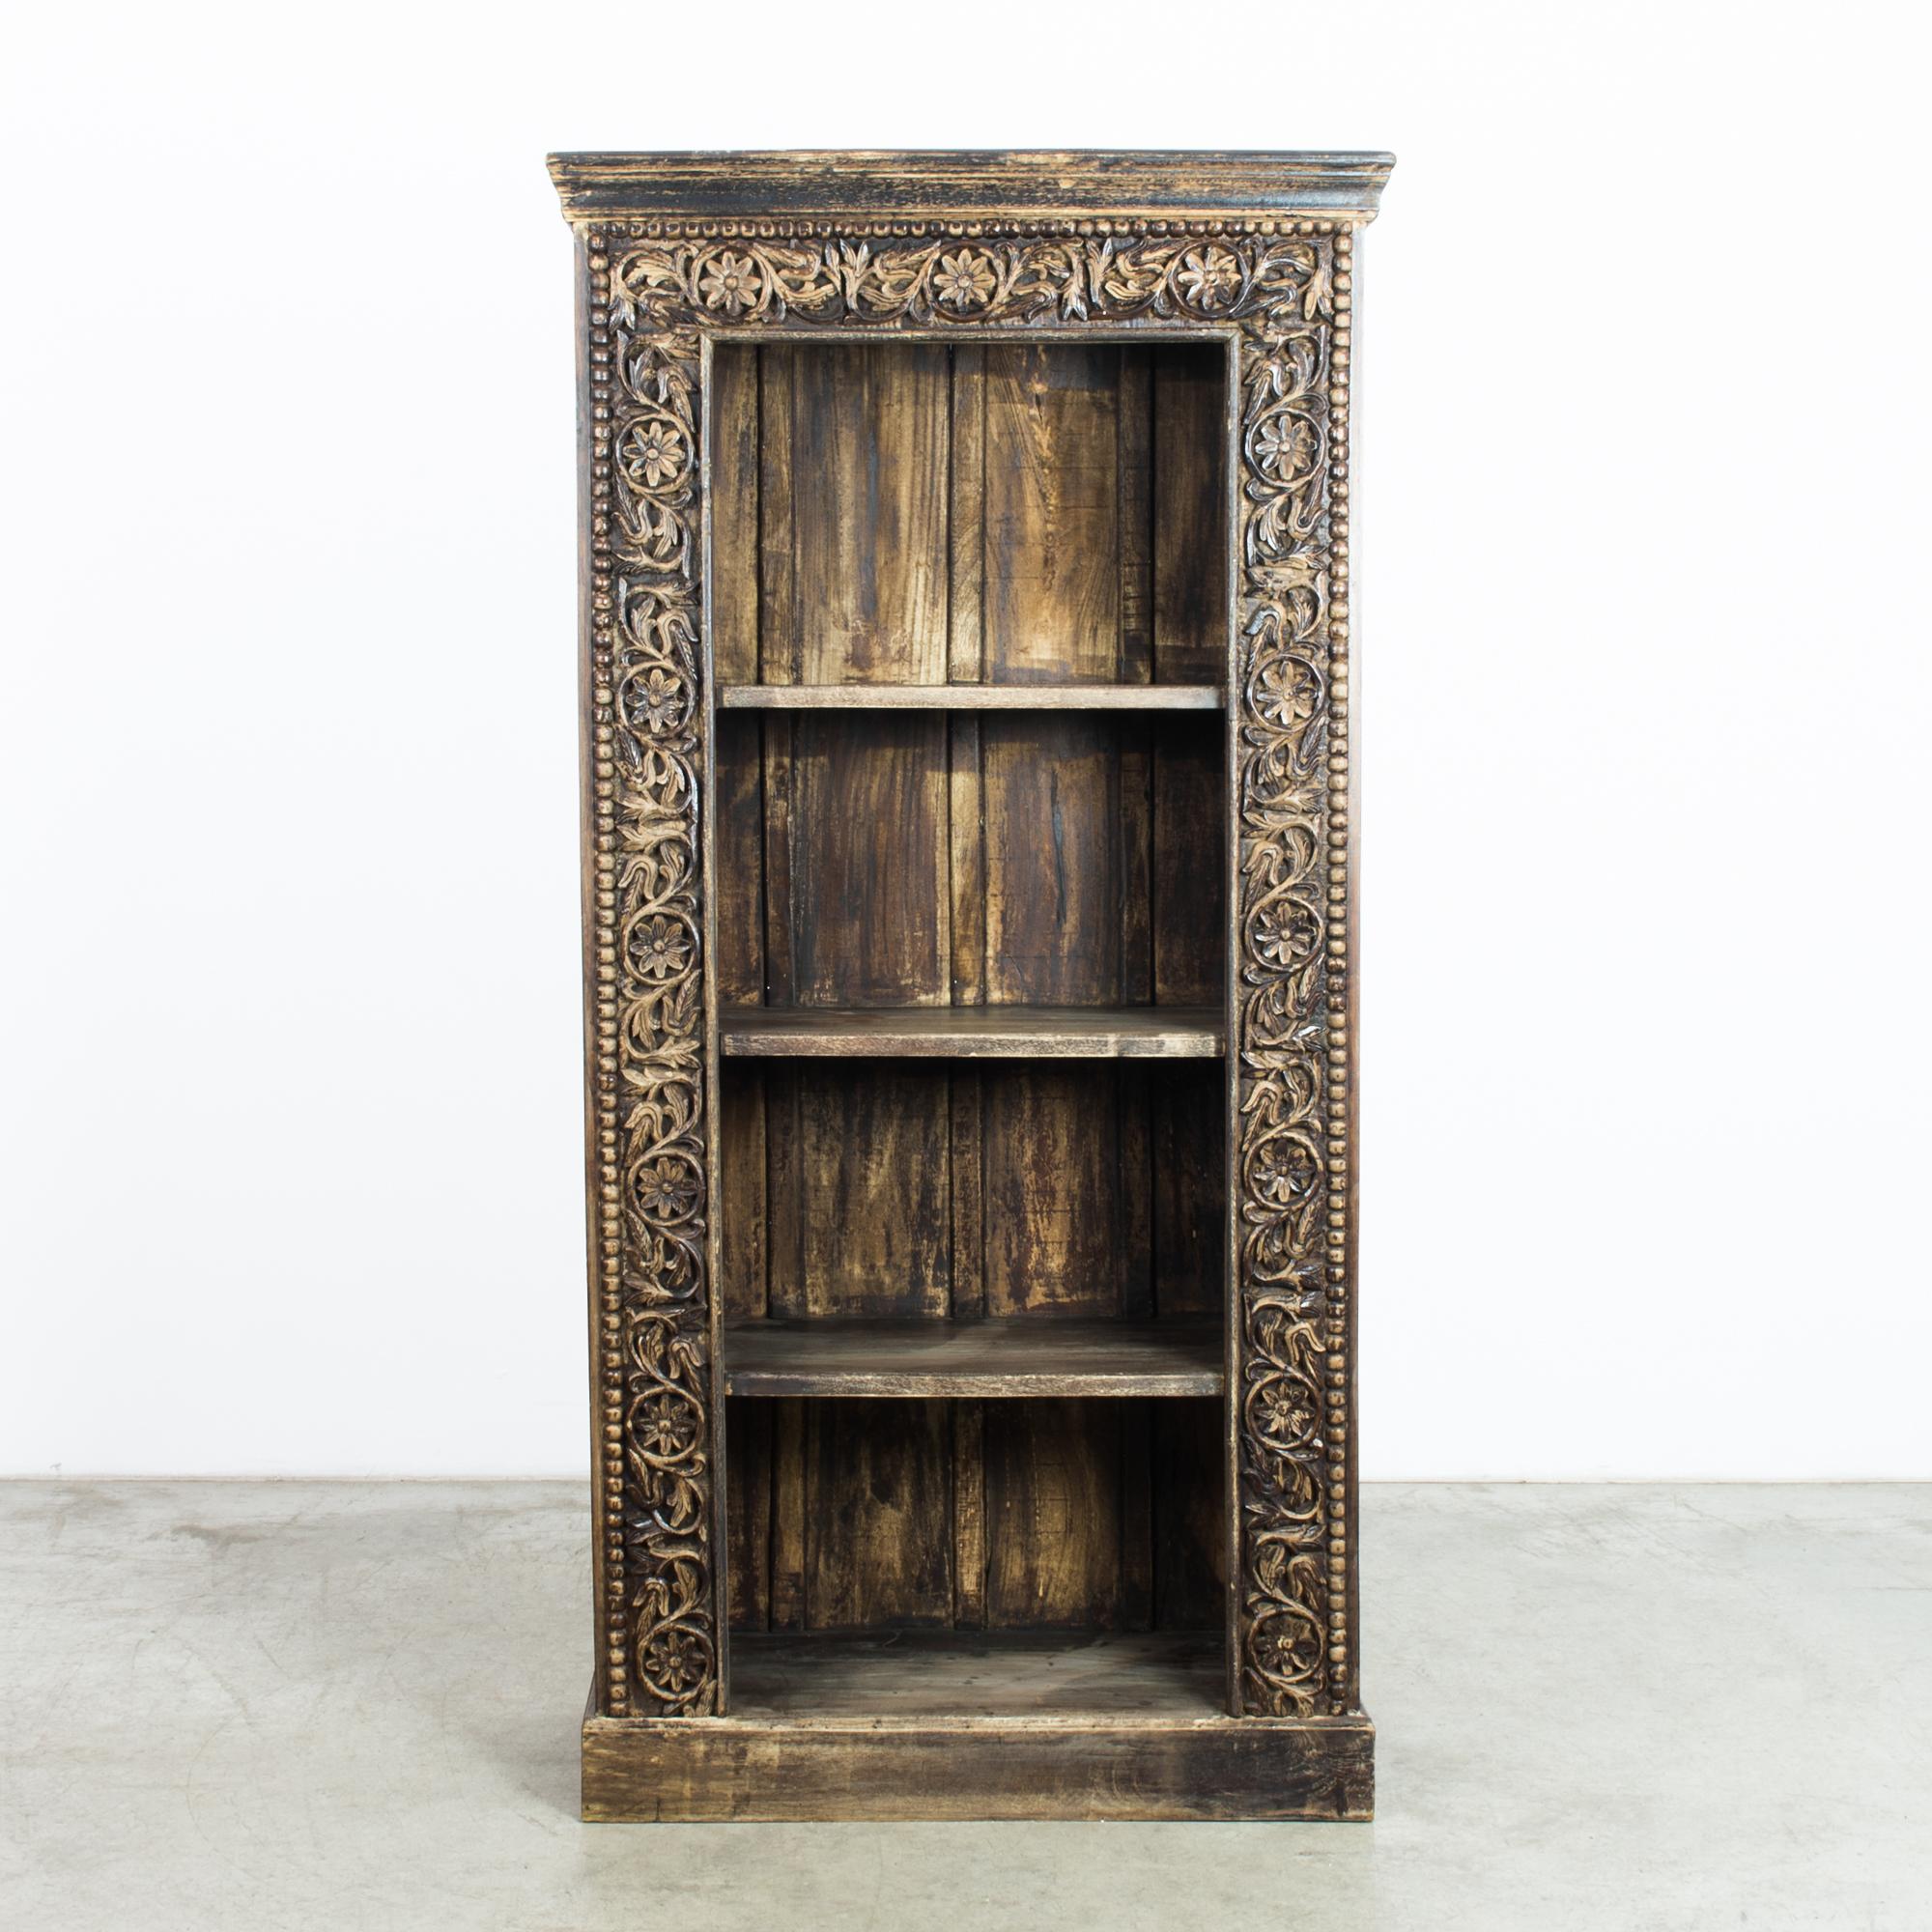 This wooden bookshelf with crown molding was made in India, circa 1970. The ornate carvings with ringed flowers and leaves once framed a collection of books resting on the four sturdy shelves. The finish has mellowed with age to display a timeworn